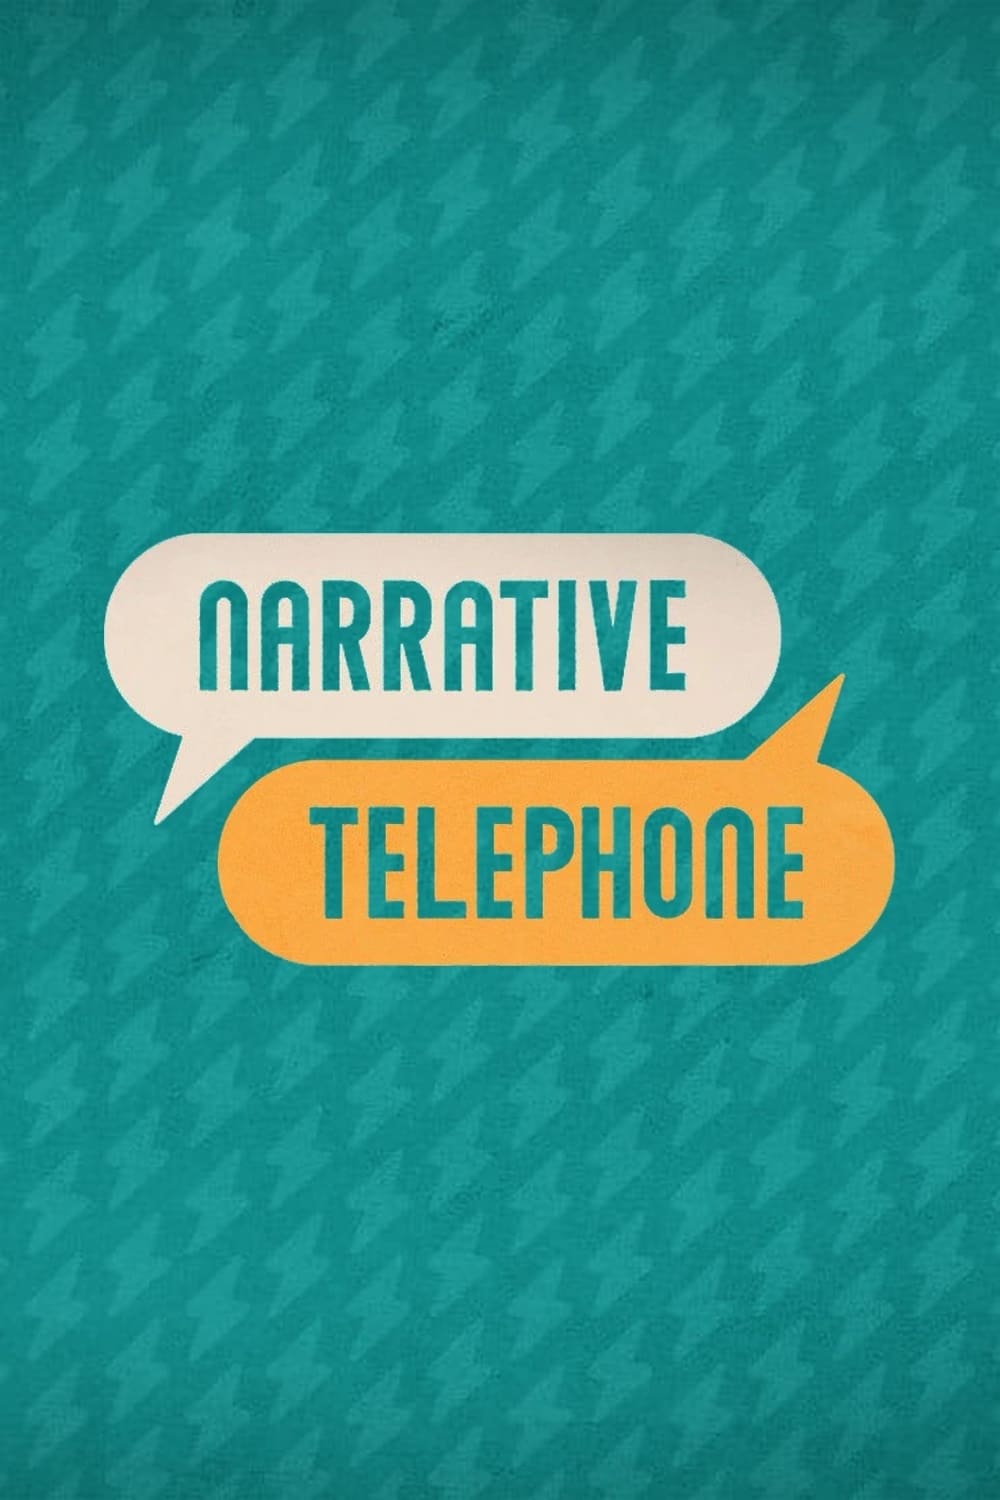 narrative-telephone-countdown-how-many-days-until-the-next-episode